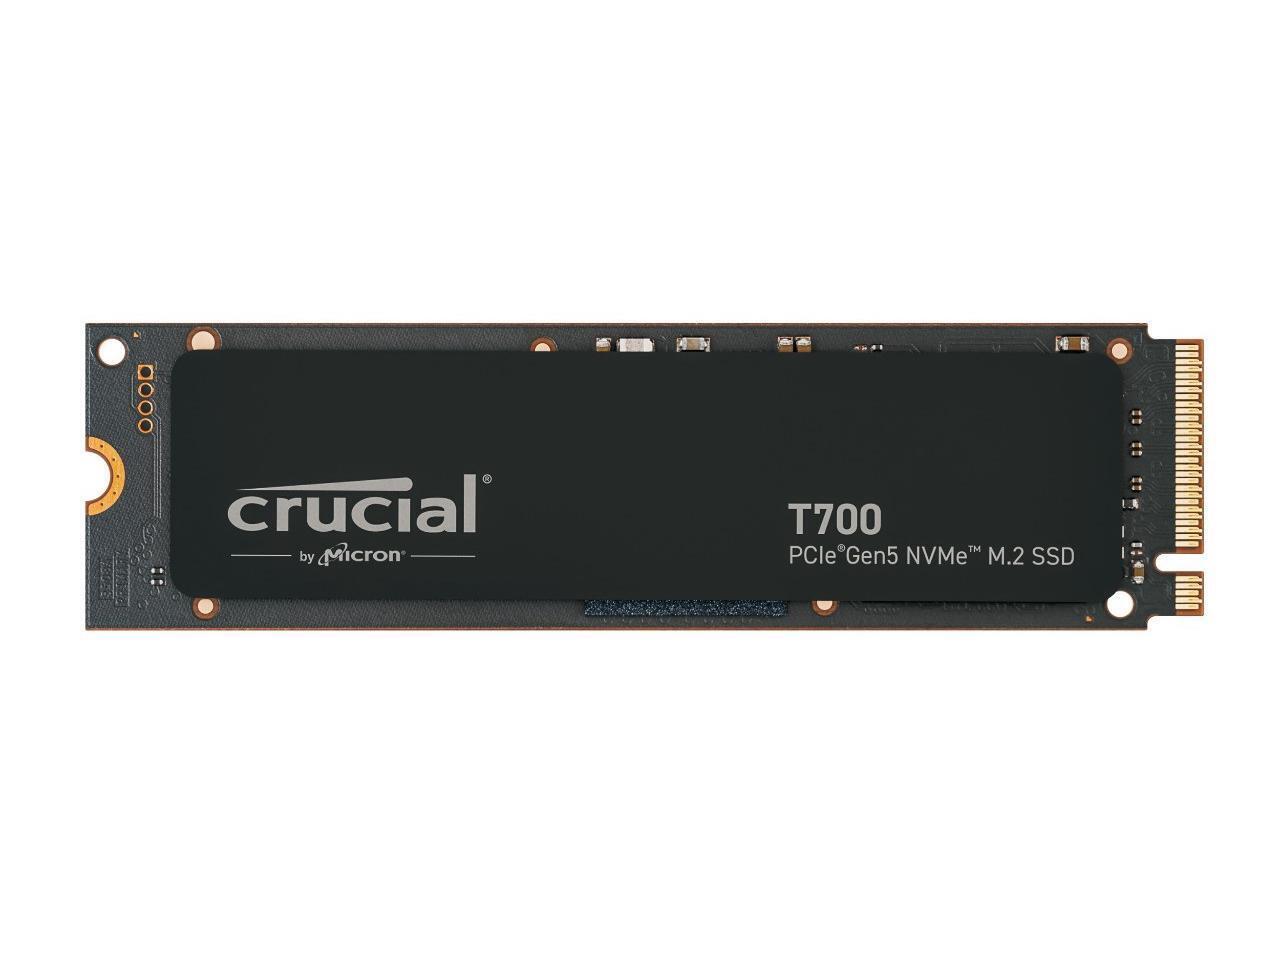 Crucial SSD 1T|CRUCIAL CT1000T700SSD3 R